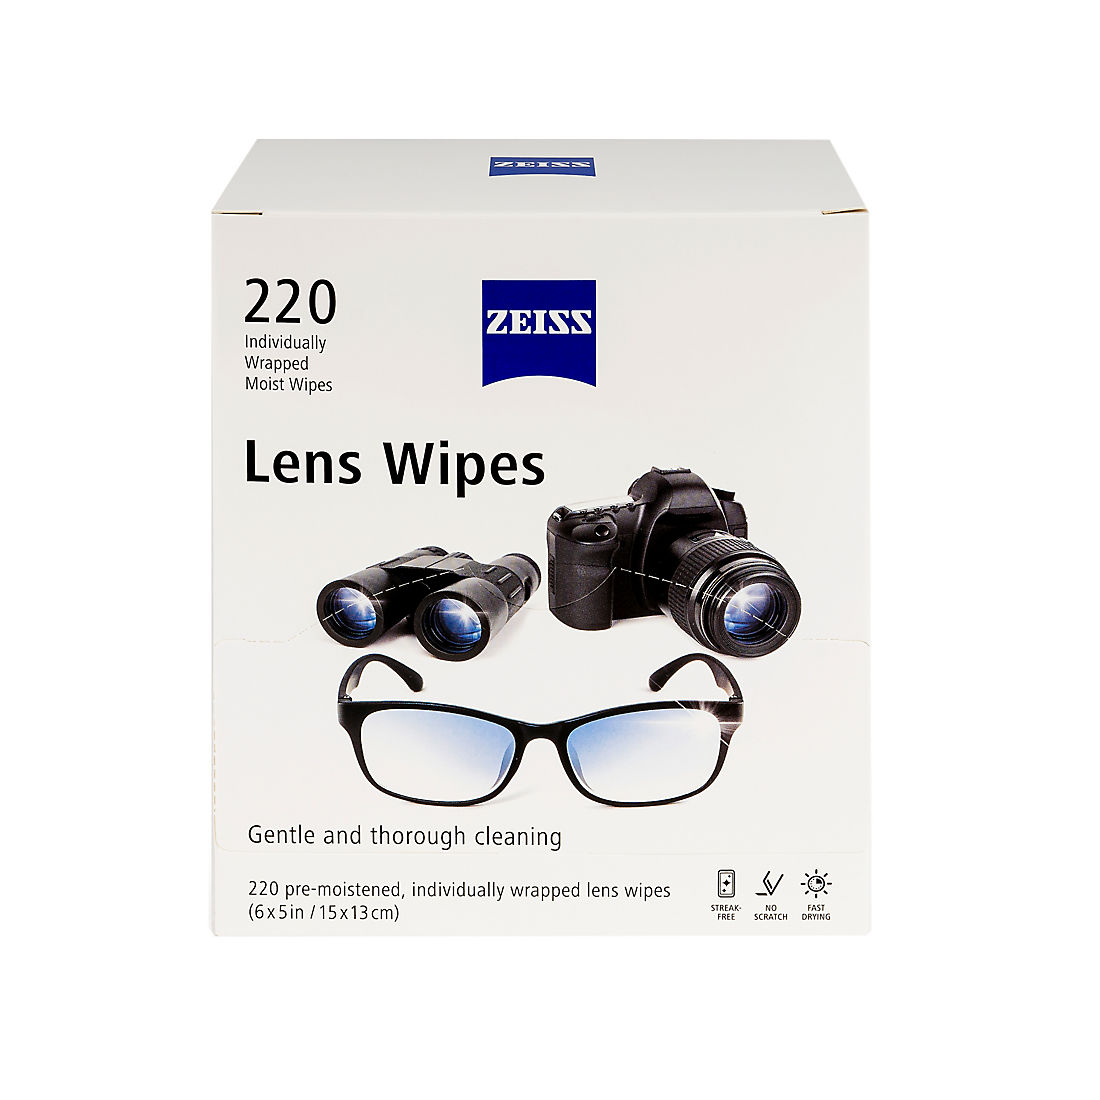 Cleaning Wipes For Lens Cleaner Pre-Moistened 100 Counts Glasses Cleaning  Wipes For Laptop Watch Smartphone